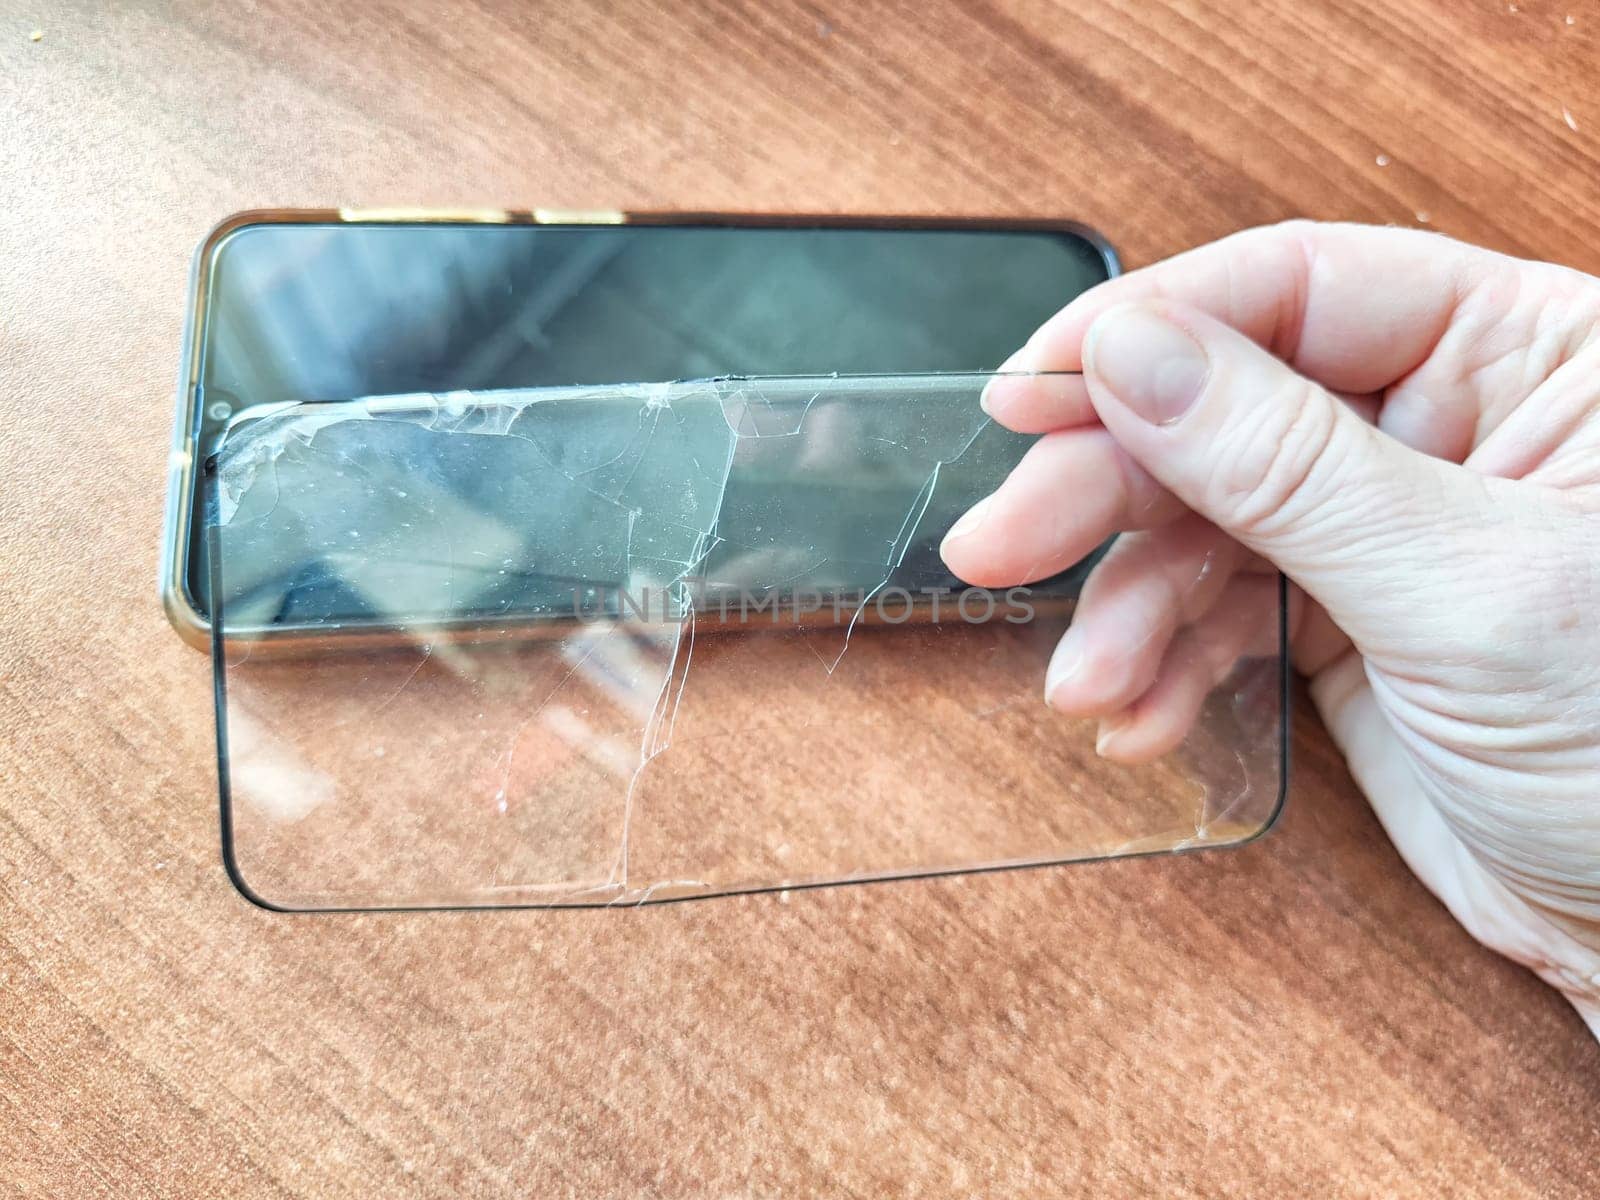 Removing Protective Film From Cracked Screen. Peeling off a cracked screen protector from a phone